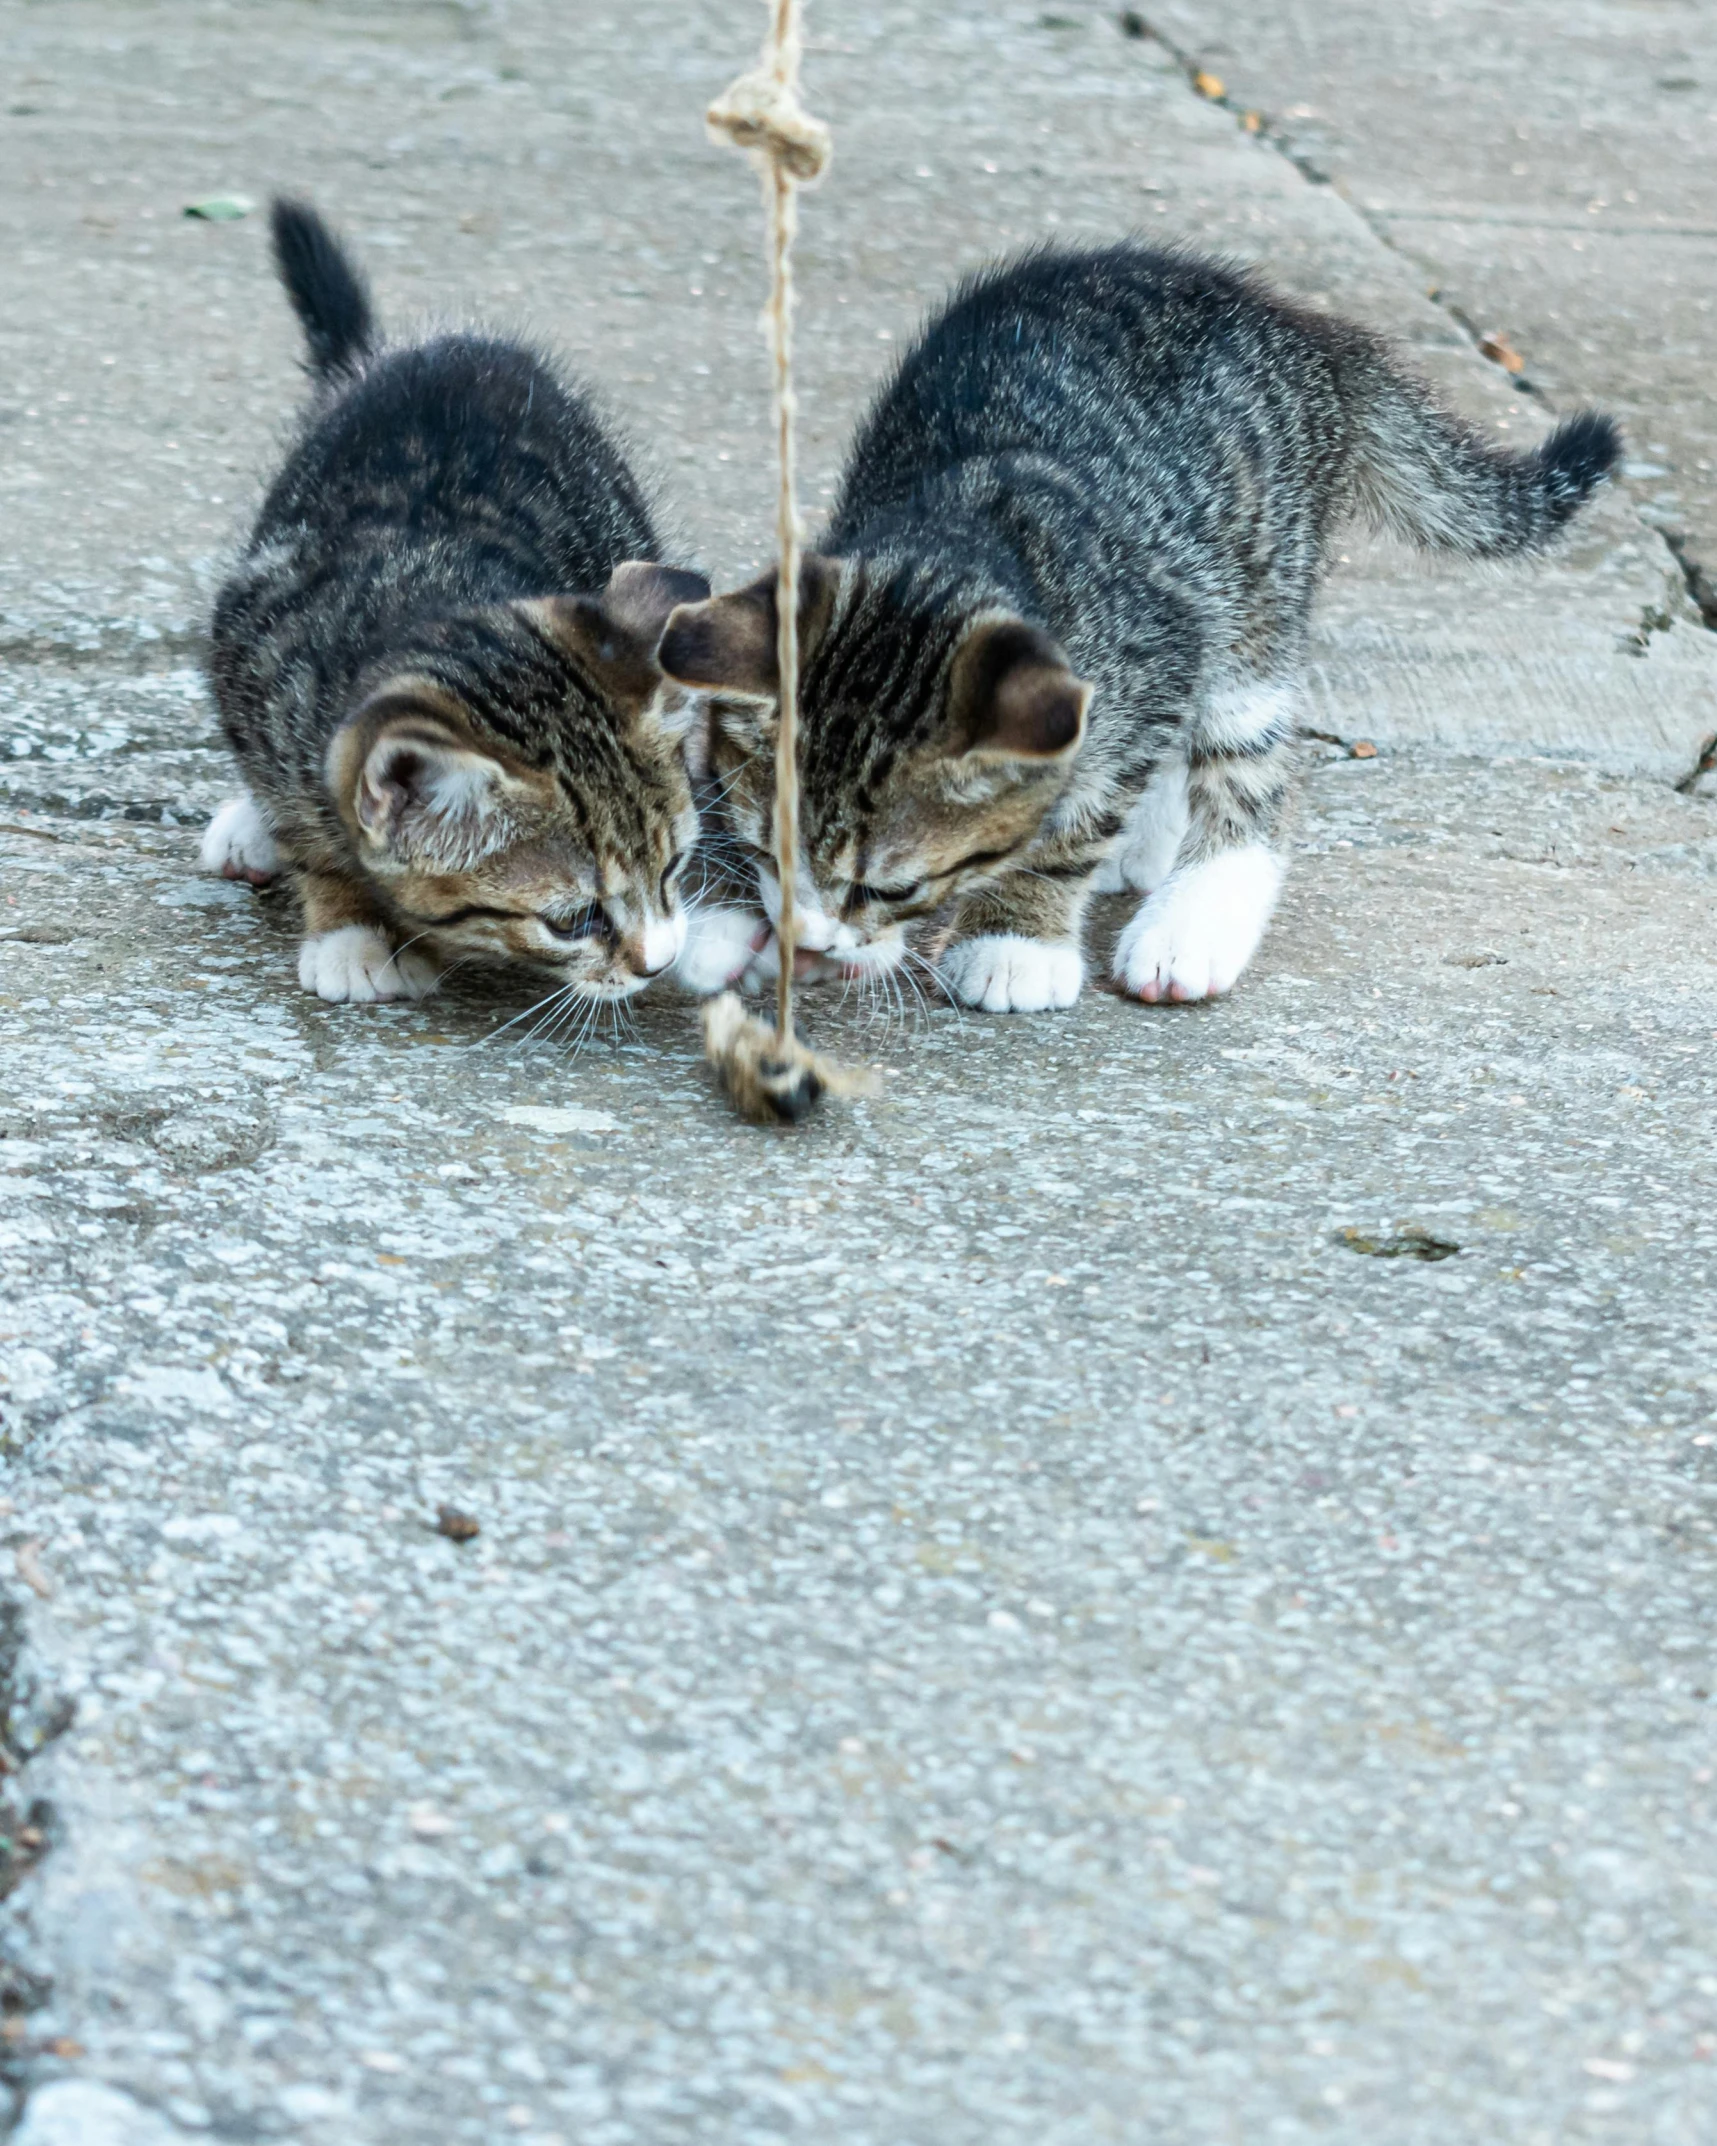 two kittens play with a tiny thread on the pavement